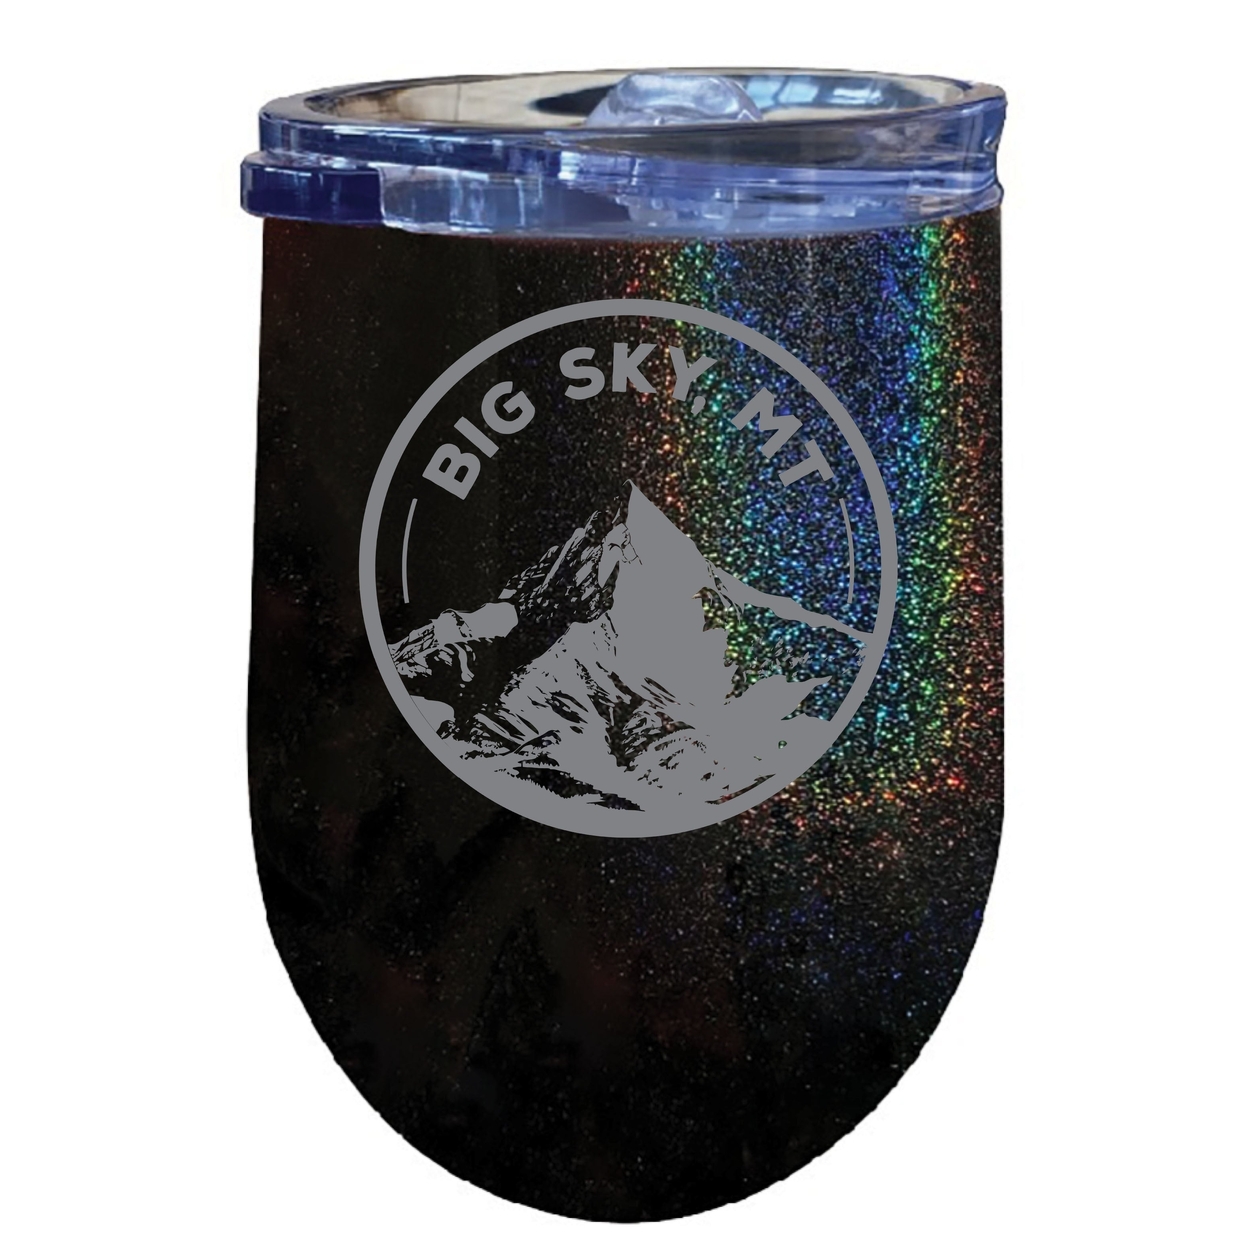 Big Sky Montana Souvenir 12 Oz Engraved Insulated Wine Stainless Steel Tumbler - Coral,,Single Unit